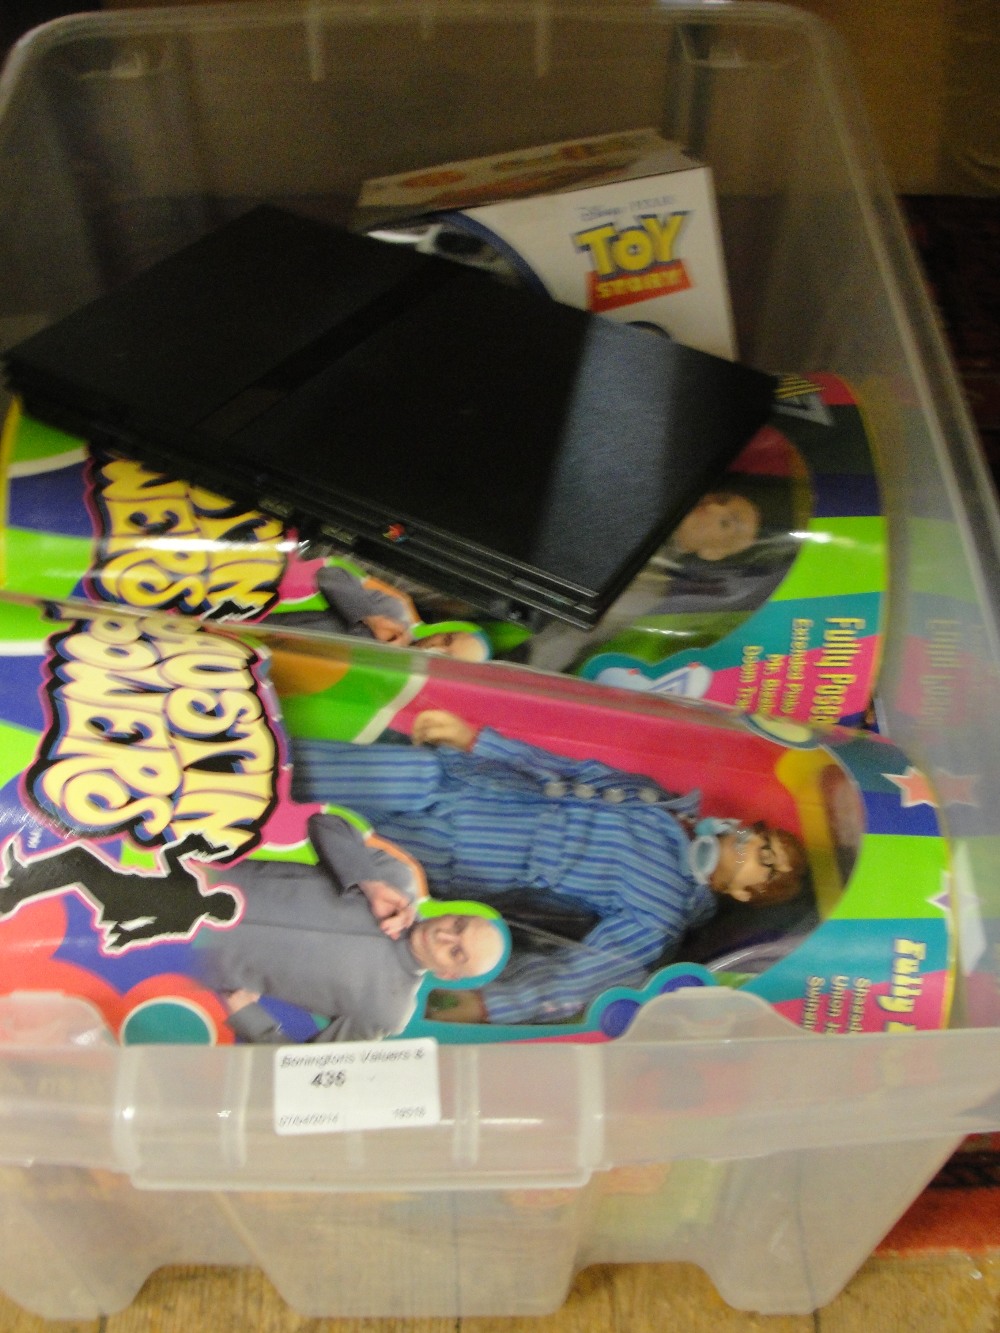 A box of modern toys PS2 & controllers, cased Austin Powers figures x 3 & Toy Story Die Cast in